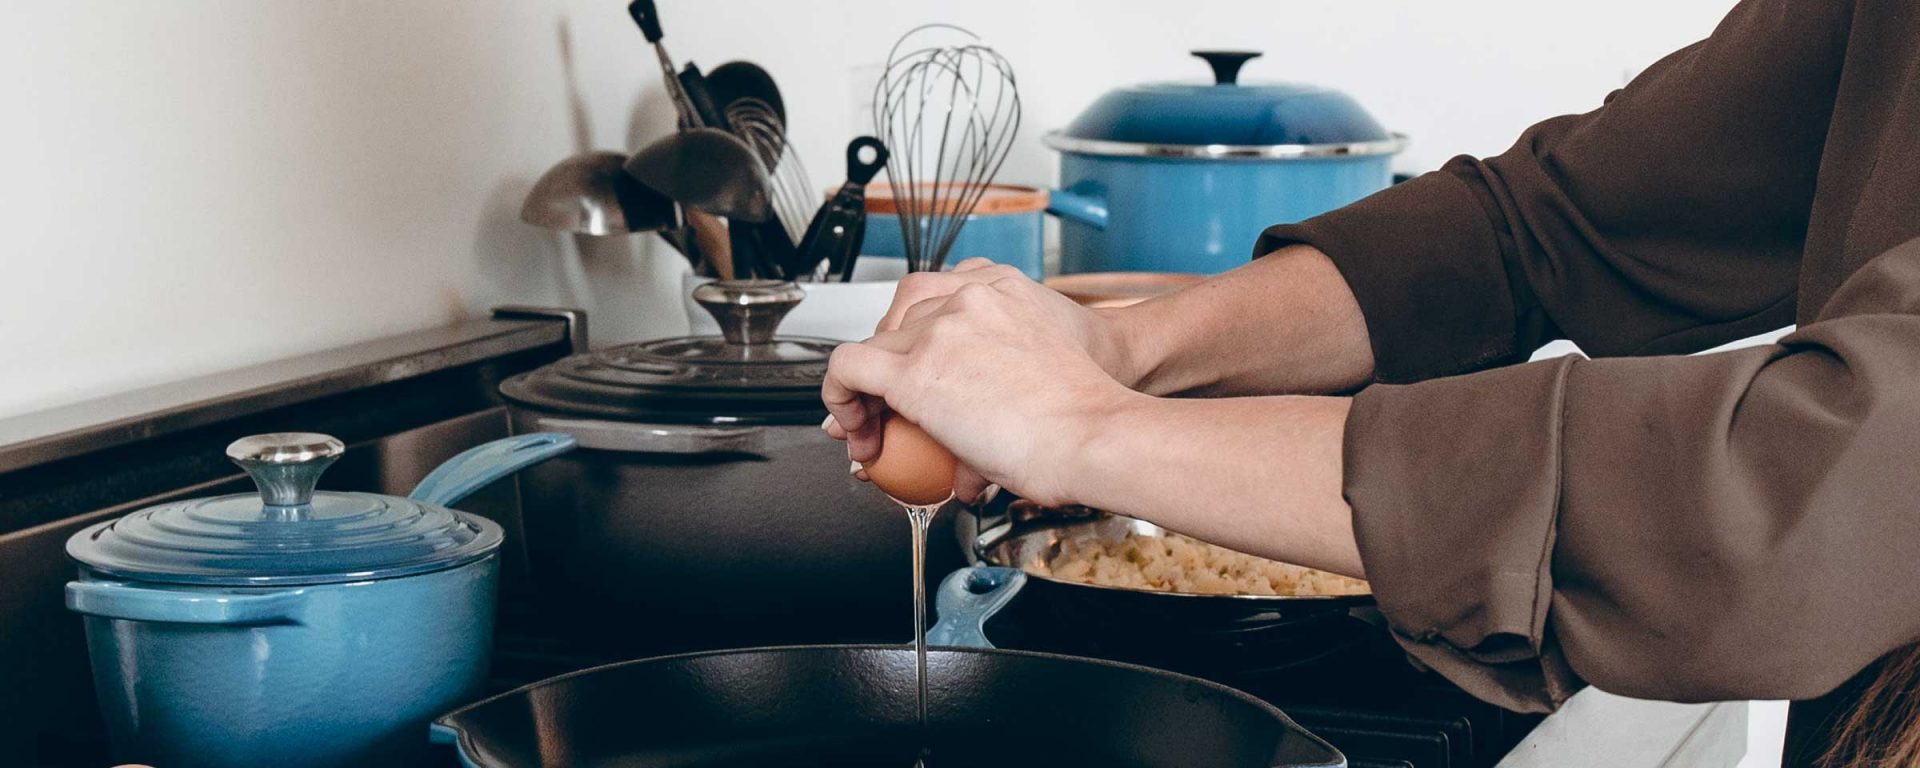 Person's hands cracking an egg into a frying pan, representing easy meals for students